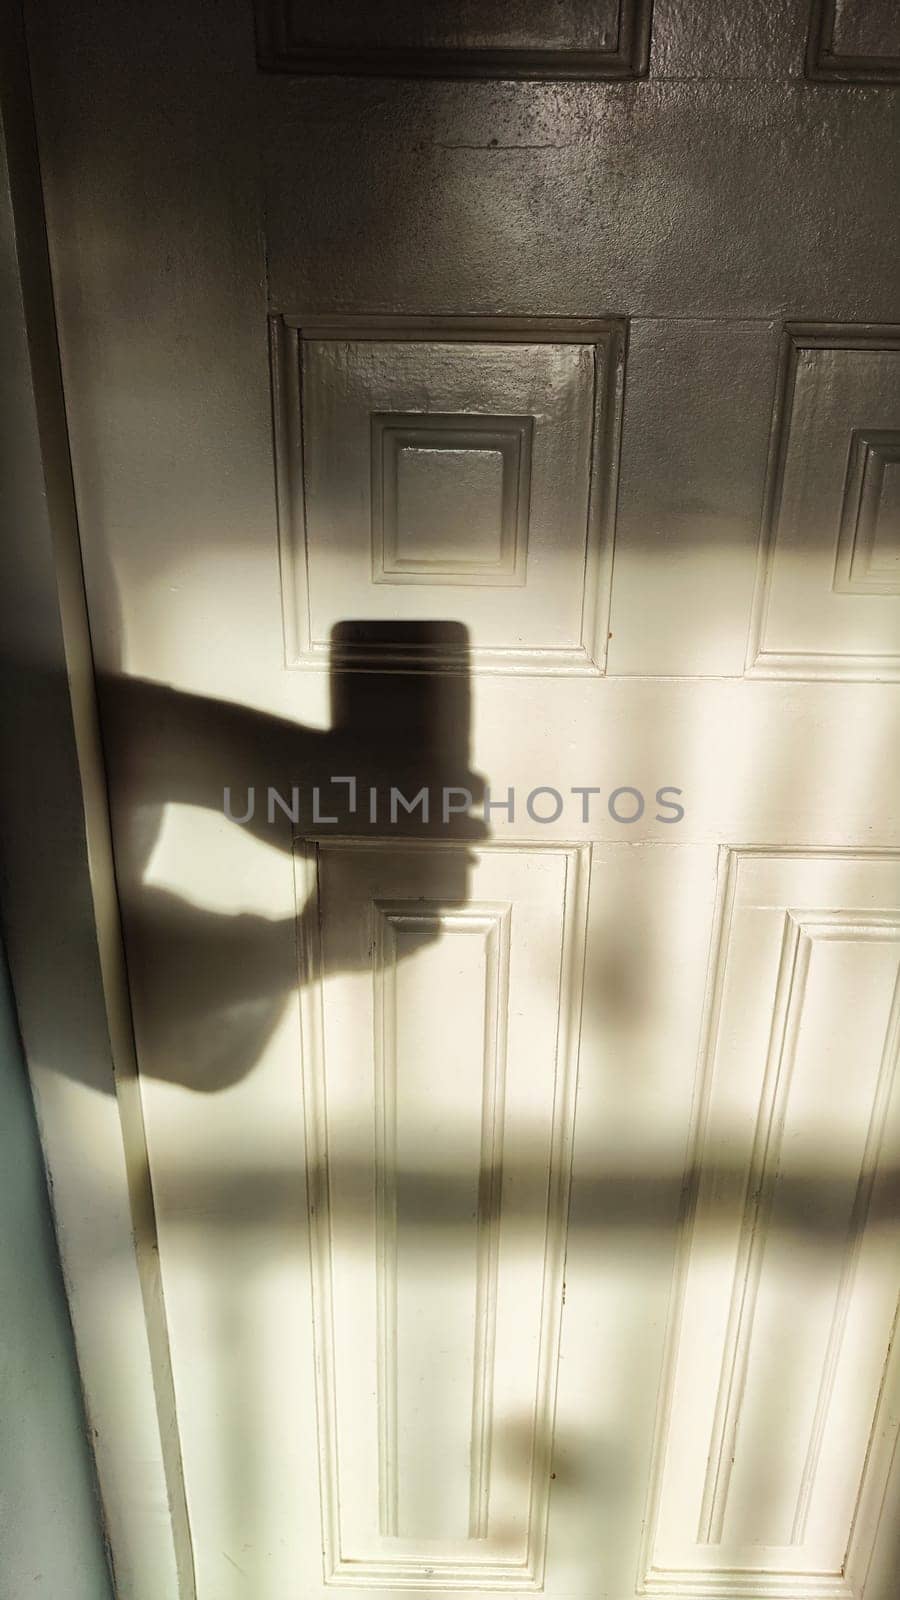 A wooden painted door and shadow from the hands of a man filming on a cell phone. Private detective, crime, mysterious entrance, maniac